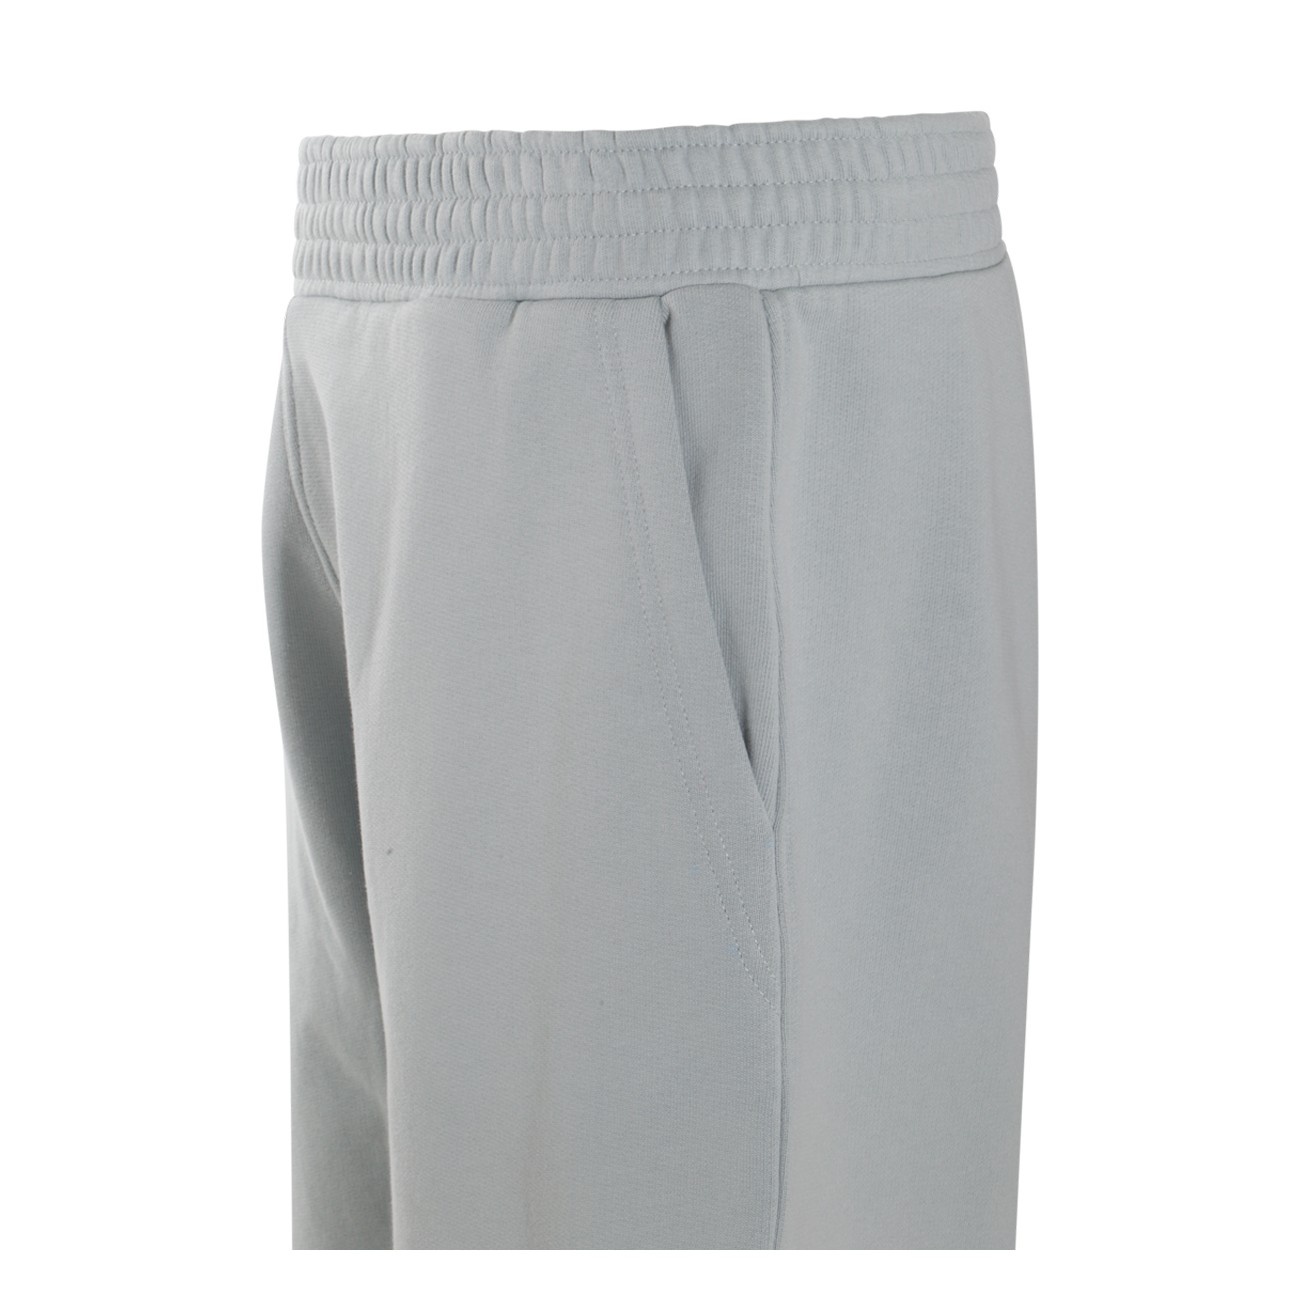 mineral blue cotton track shorts - 4